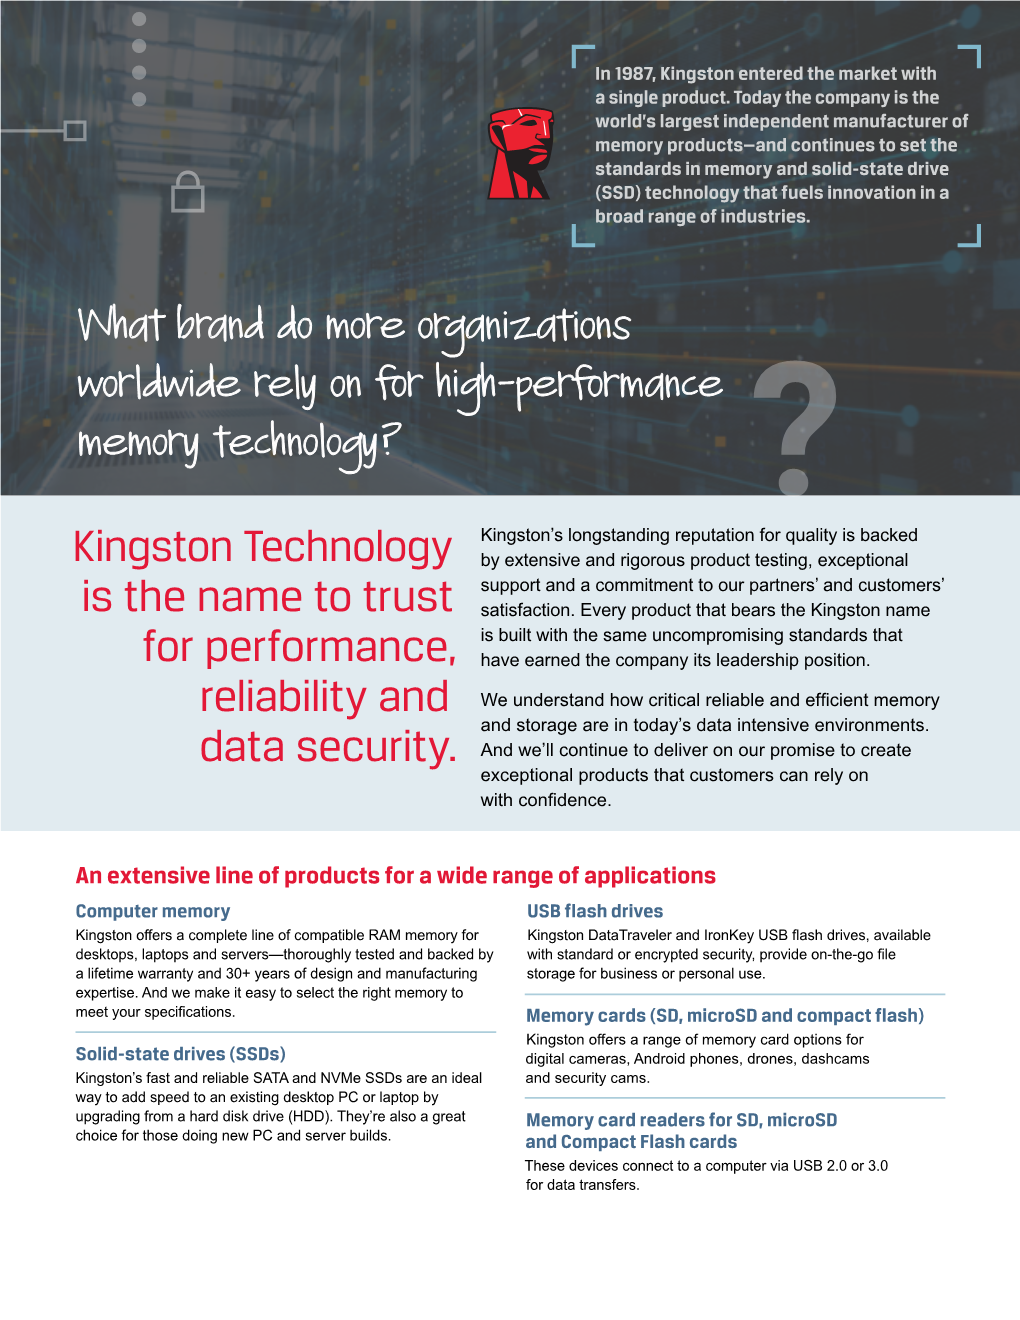 Kingston Technology Is the Name to Trust for Performance, Reliability and Data Security